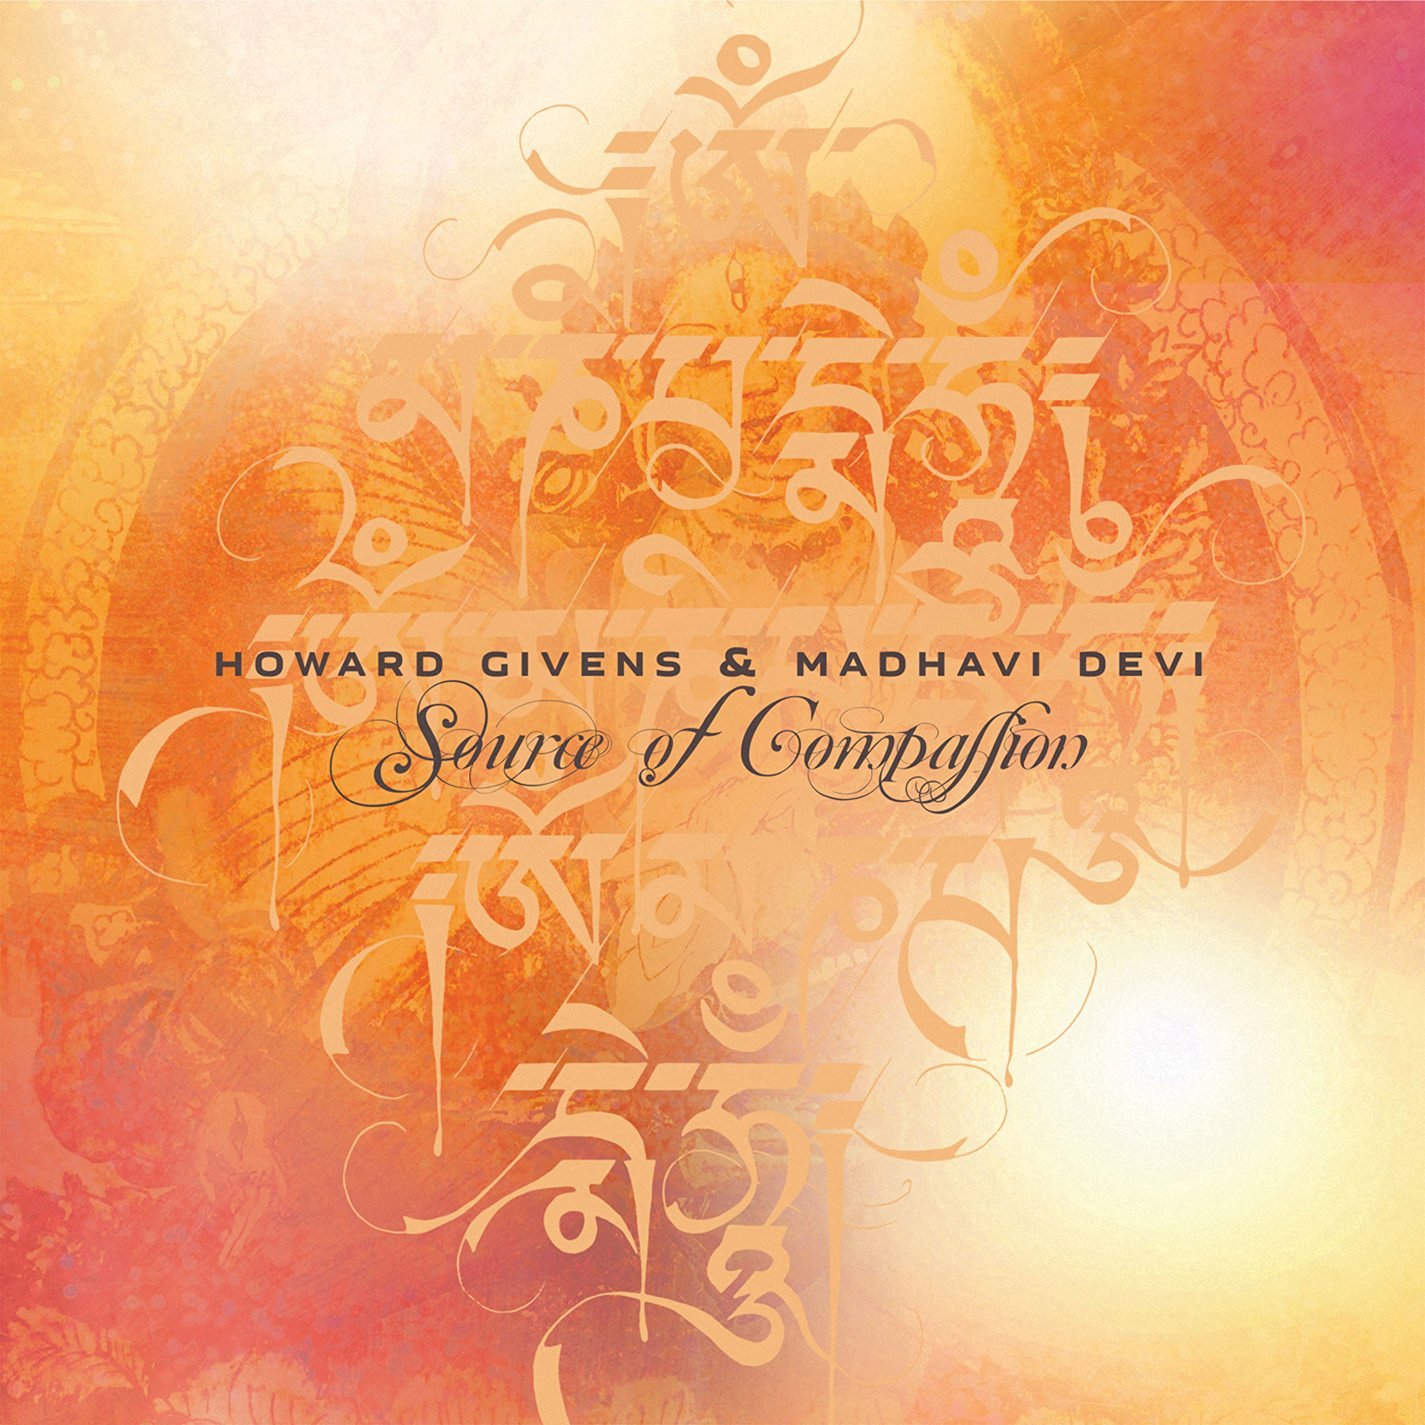 Howard Givens & Madhavi Devi — Source of Compassion